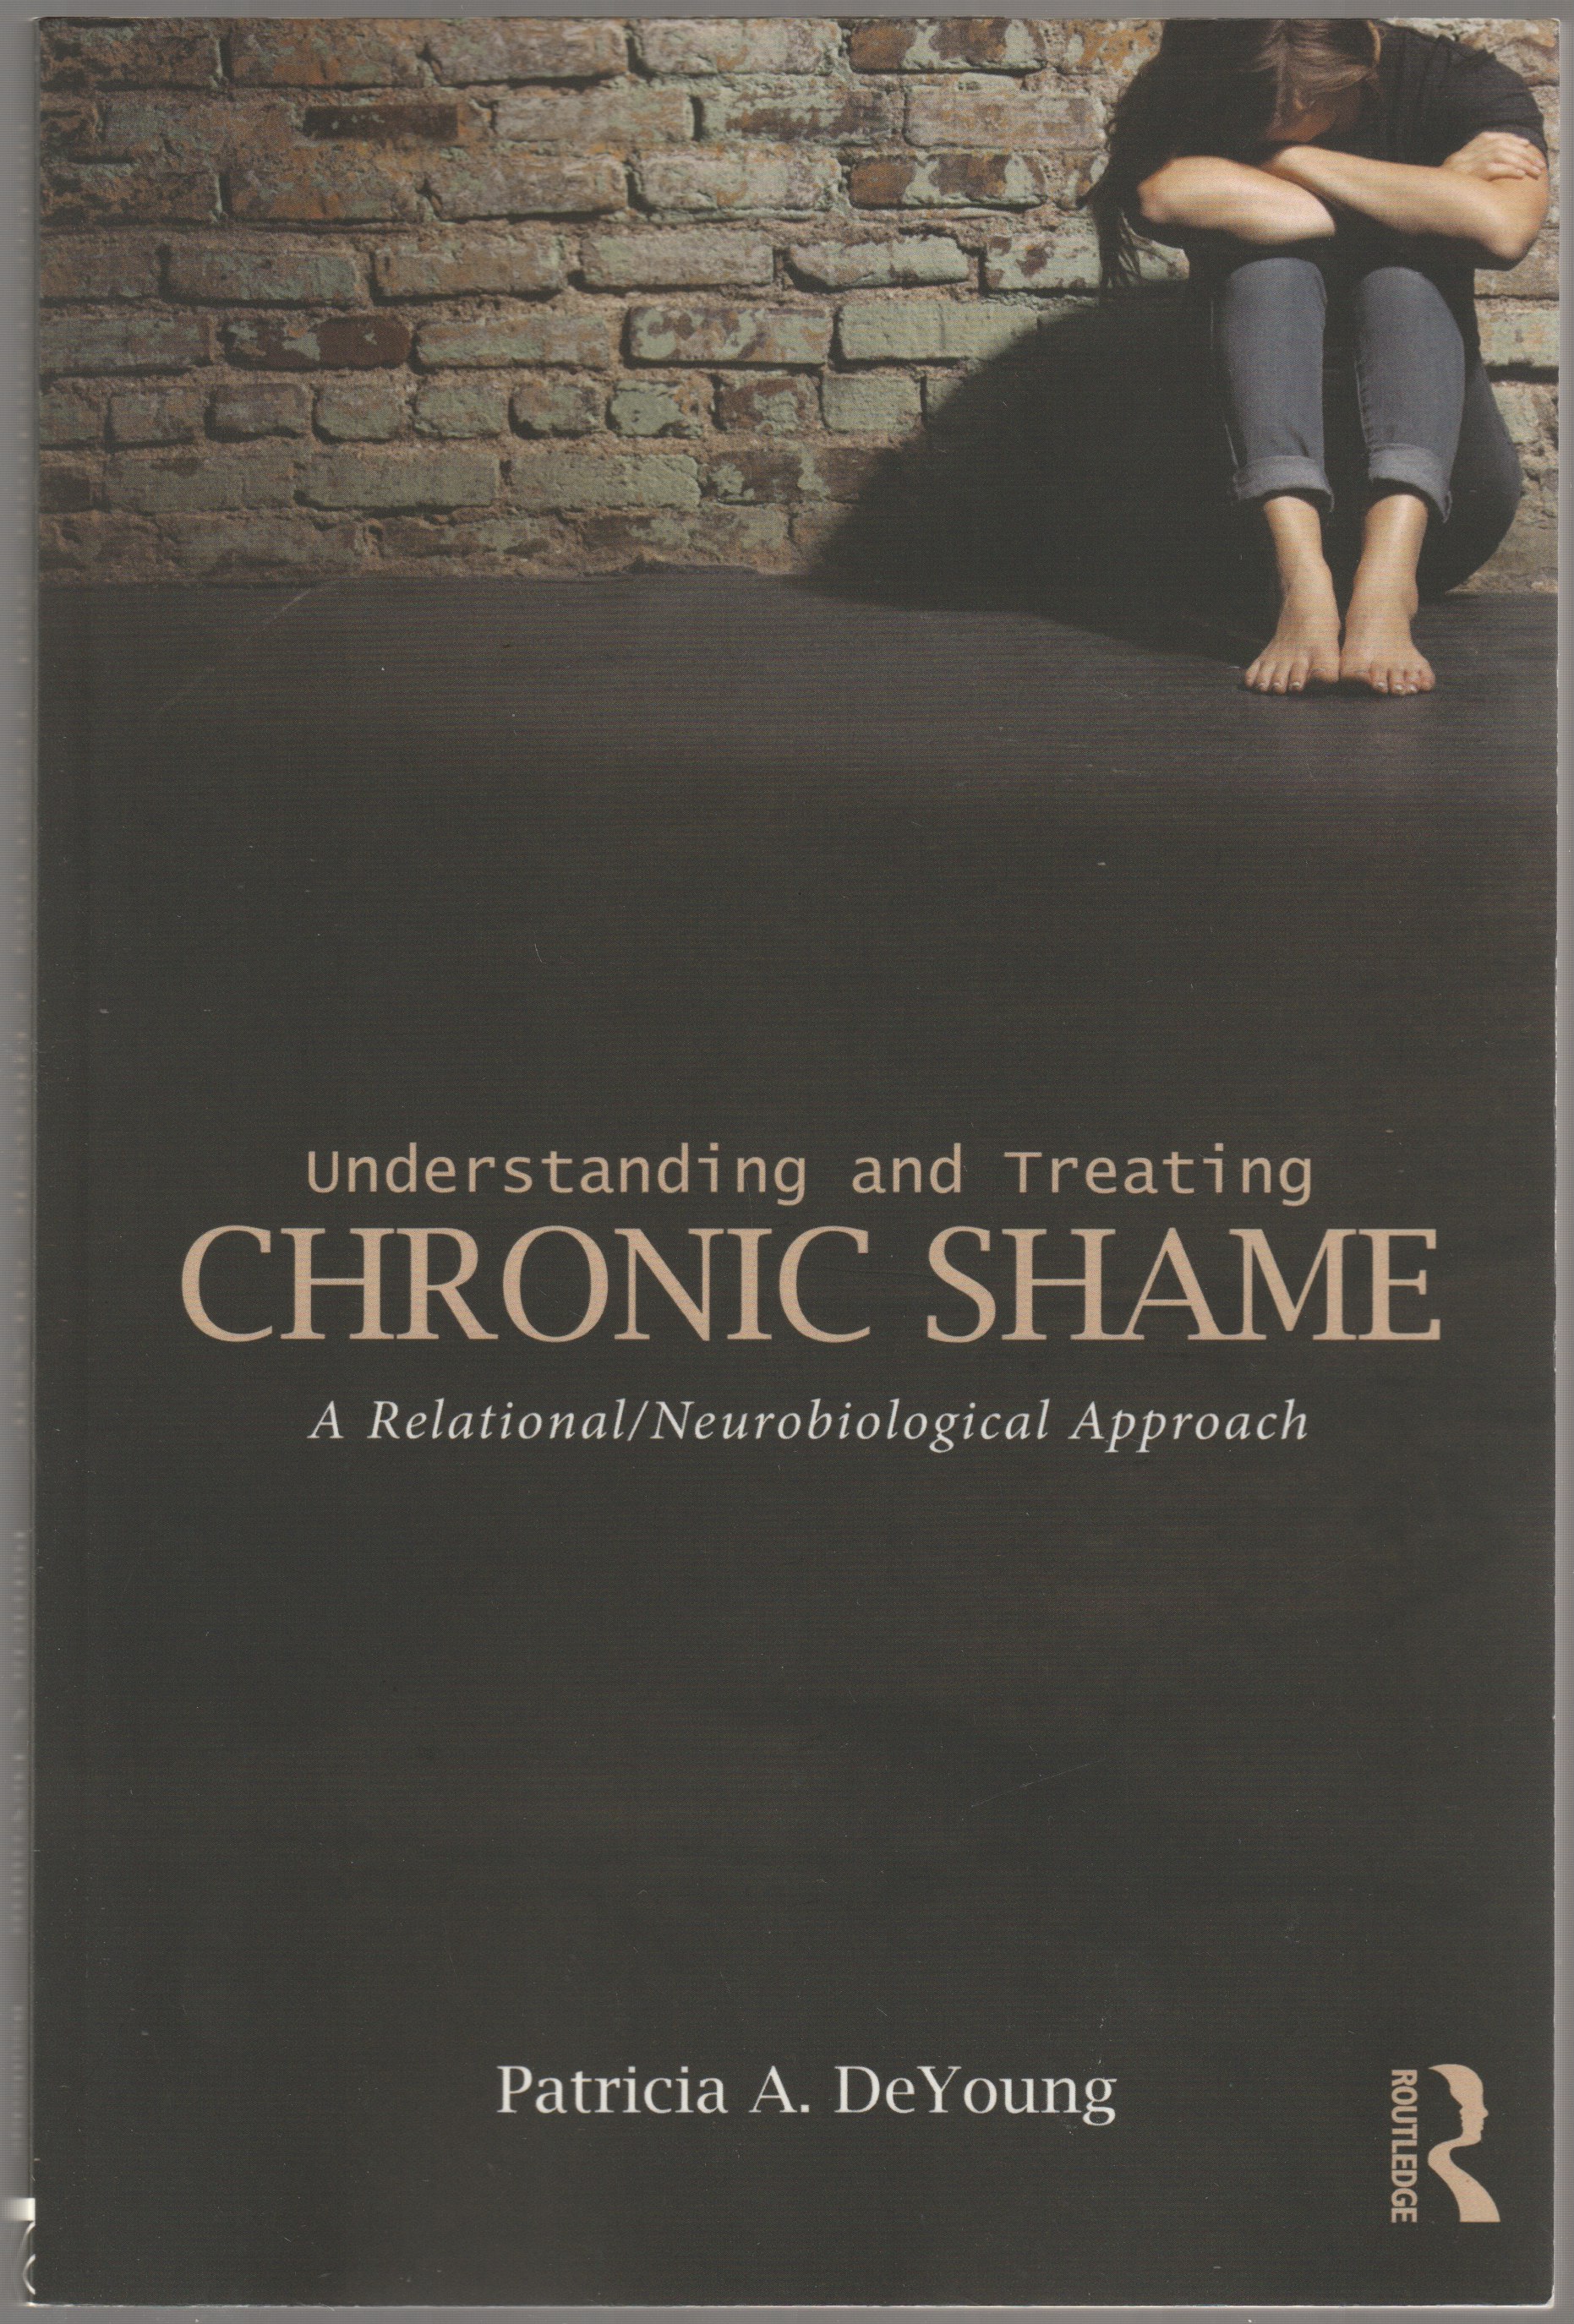 Understanding and treating chronic shame : a relational/neurobiological approach.